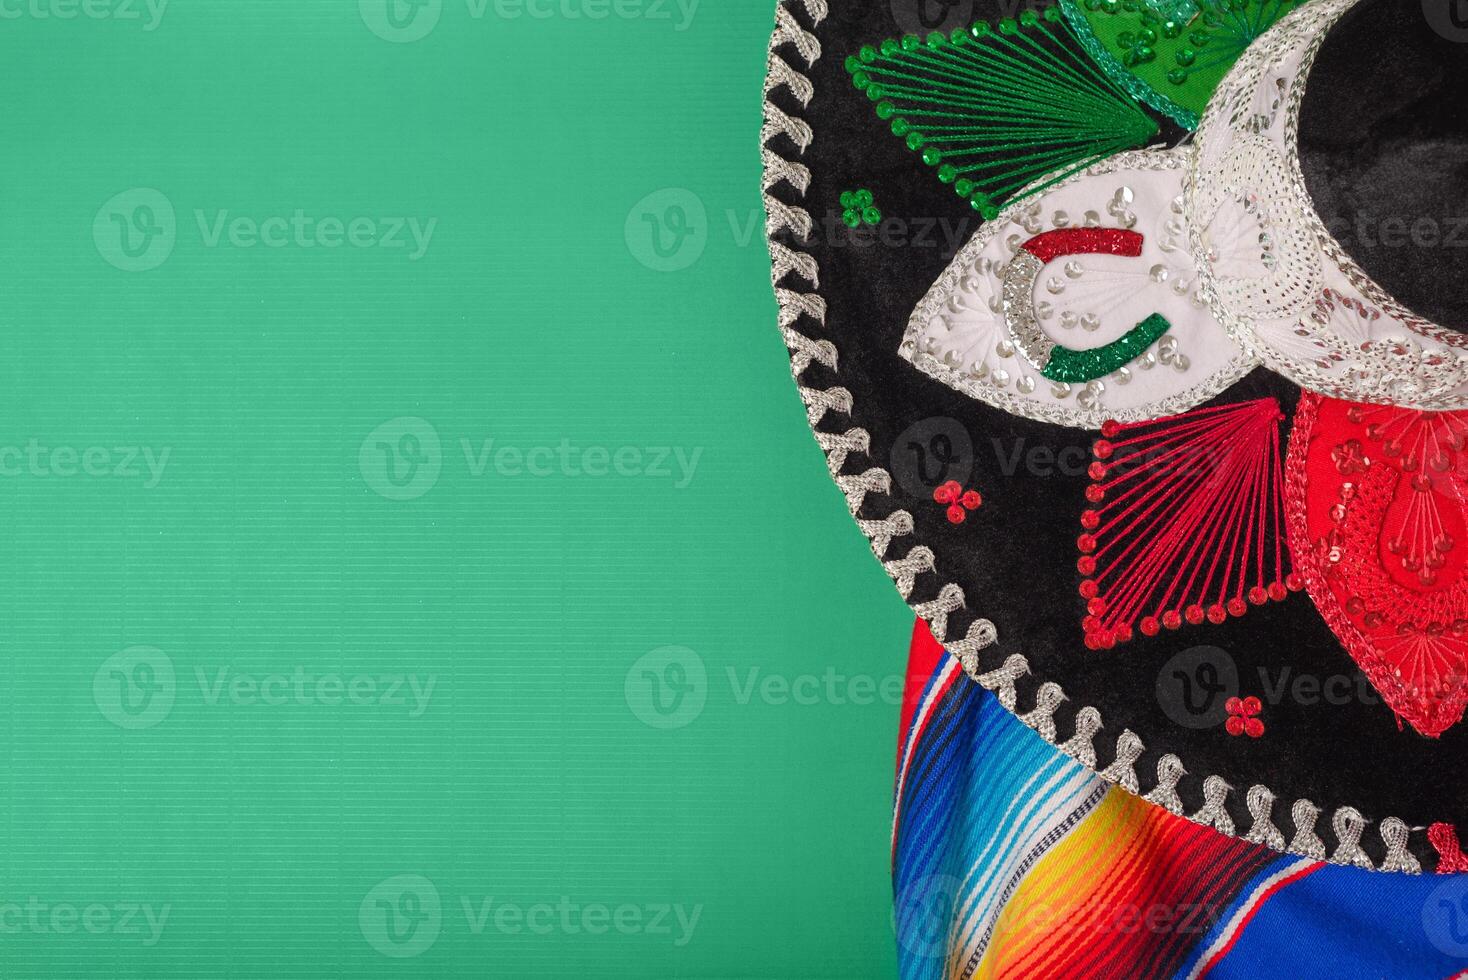 Mariachi hat and serape on green background. Mexican independence concept. Cinco de mayo background. photo